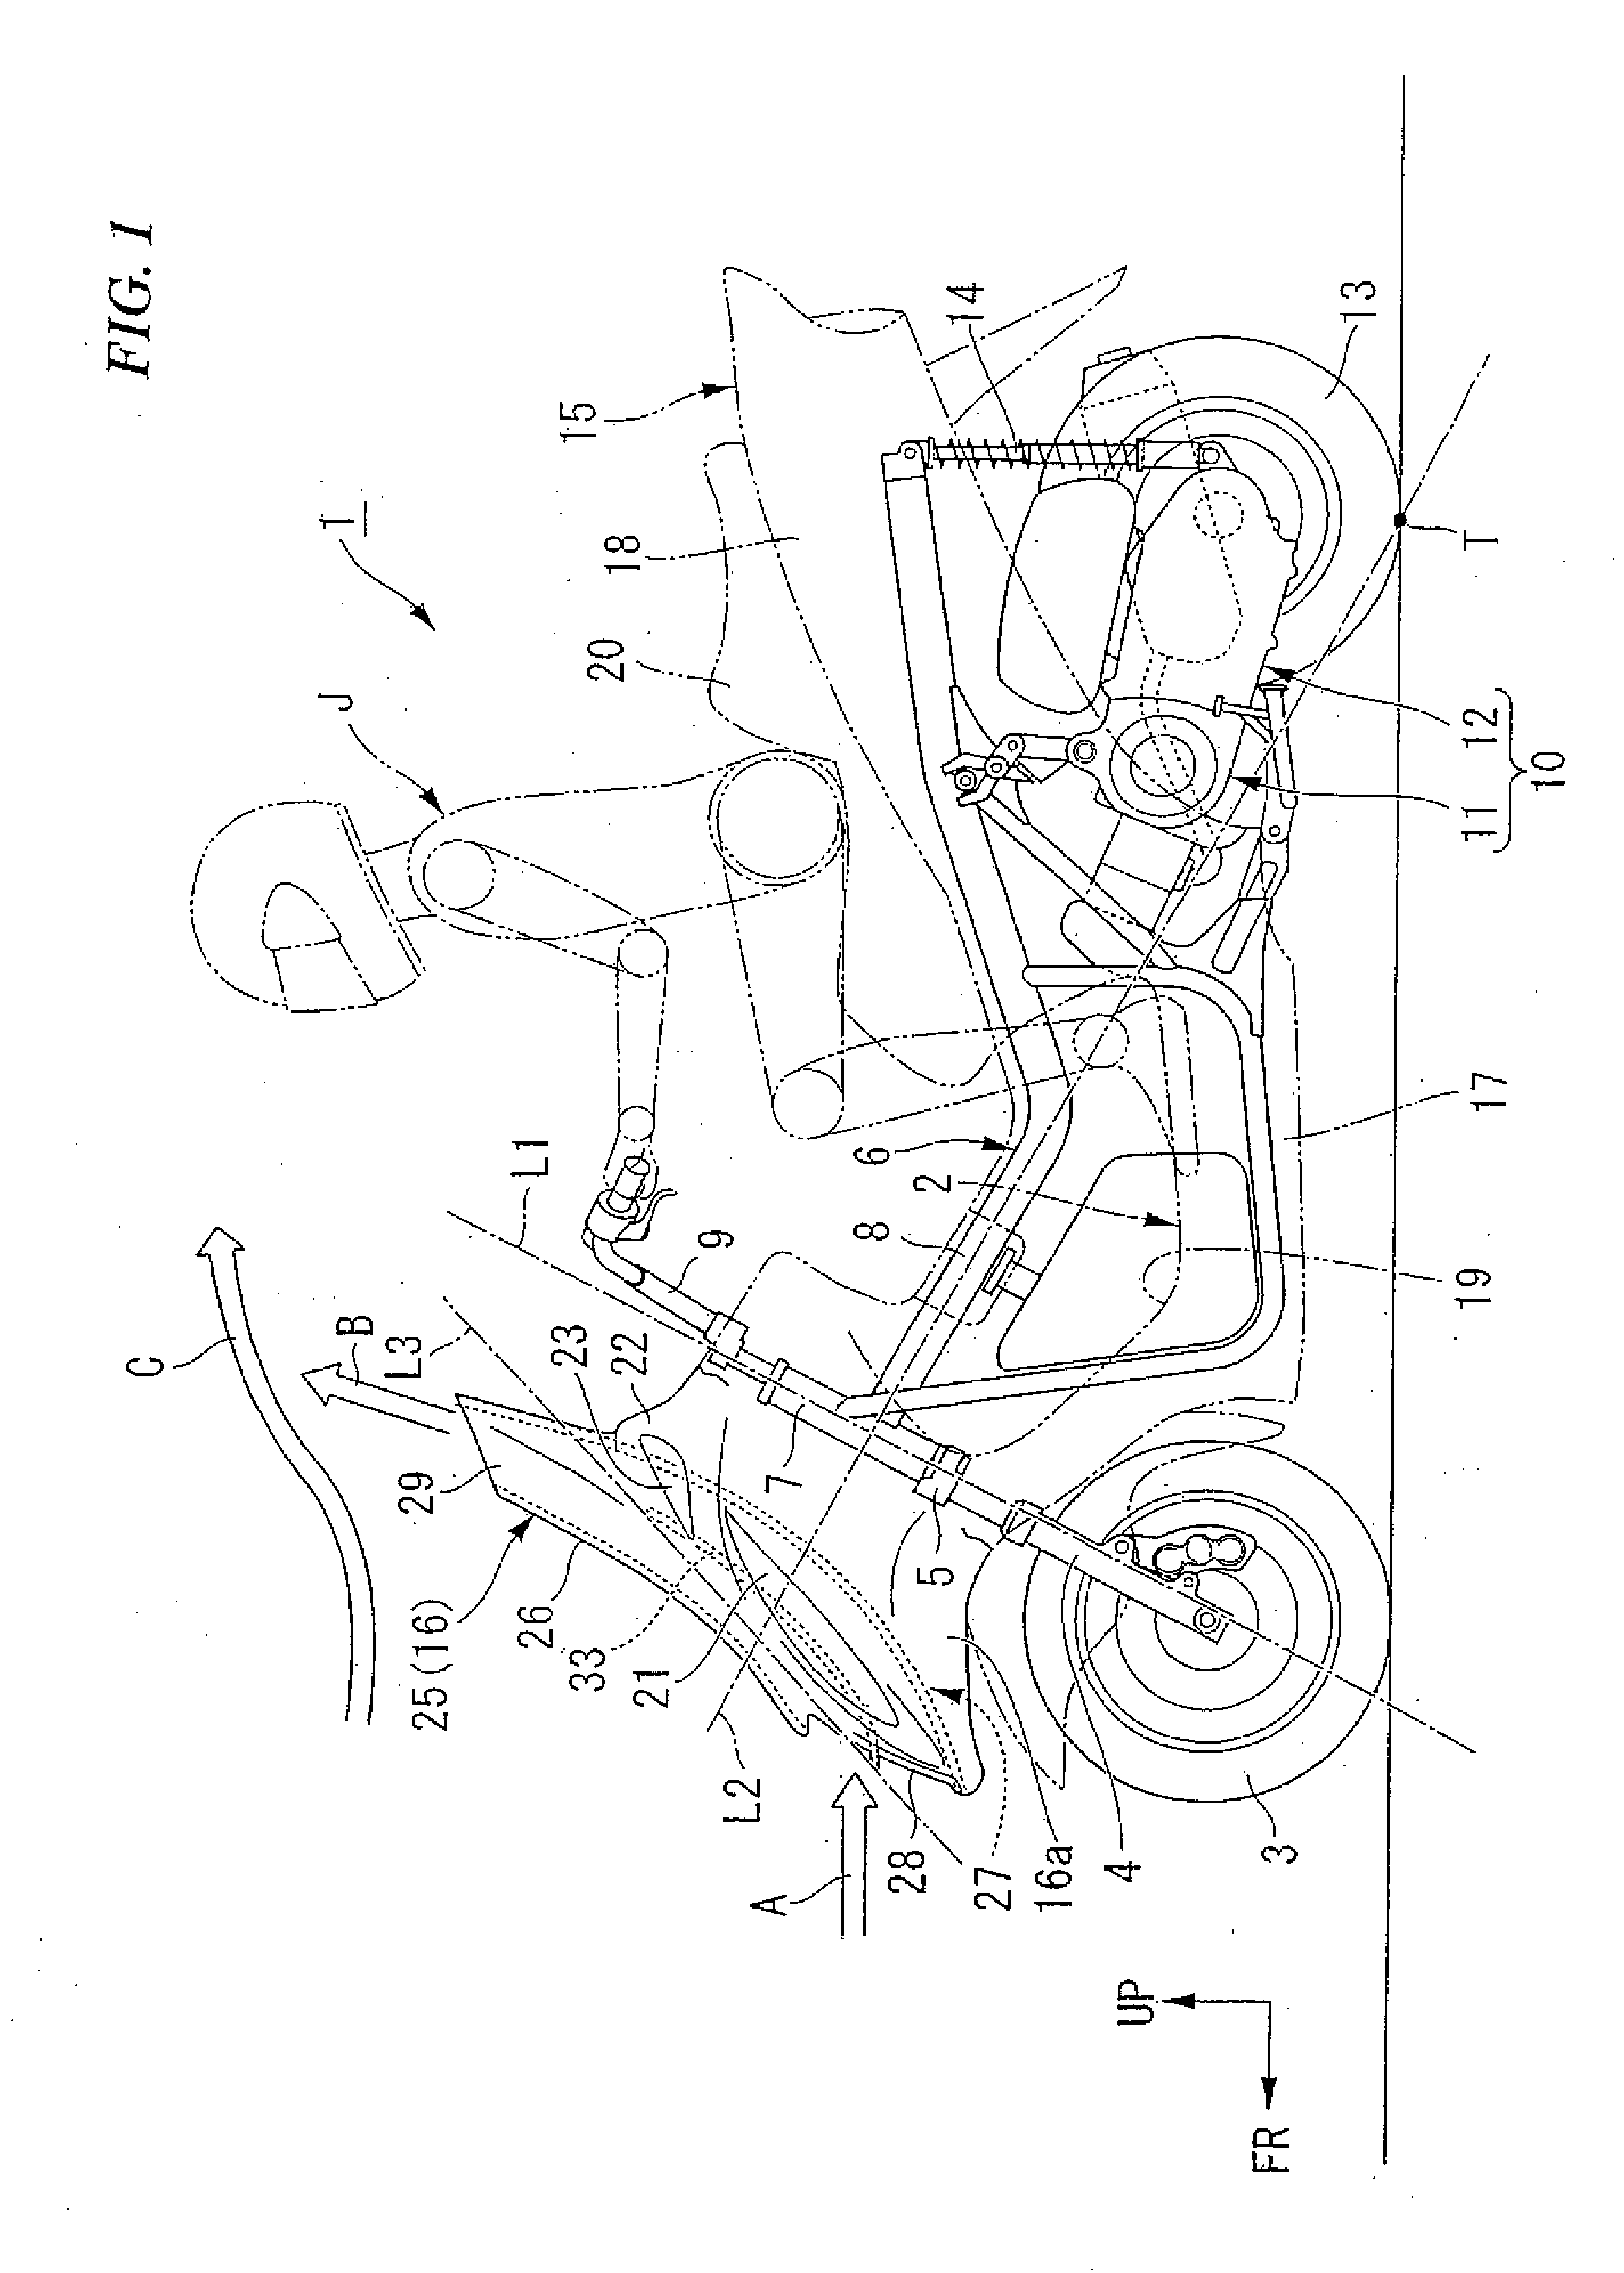 Windshield device, and cool airflow device for saddle ride type vehicle